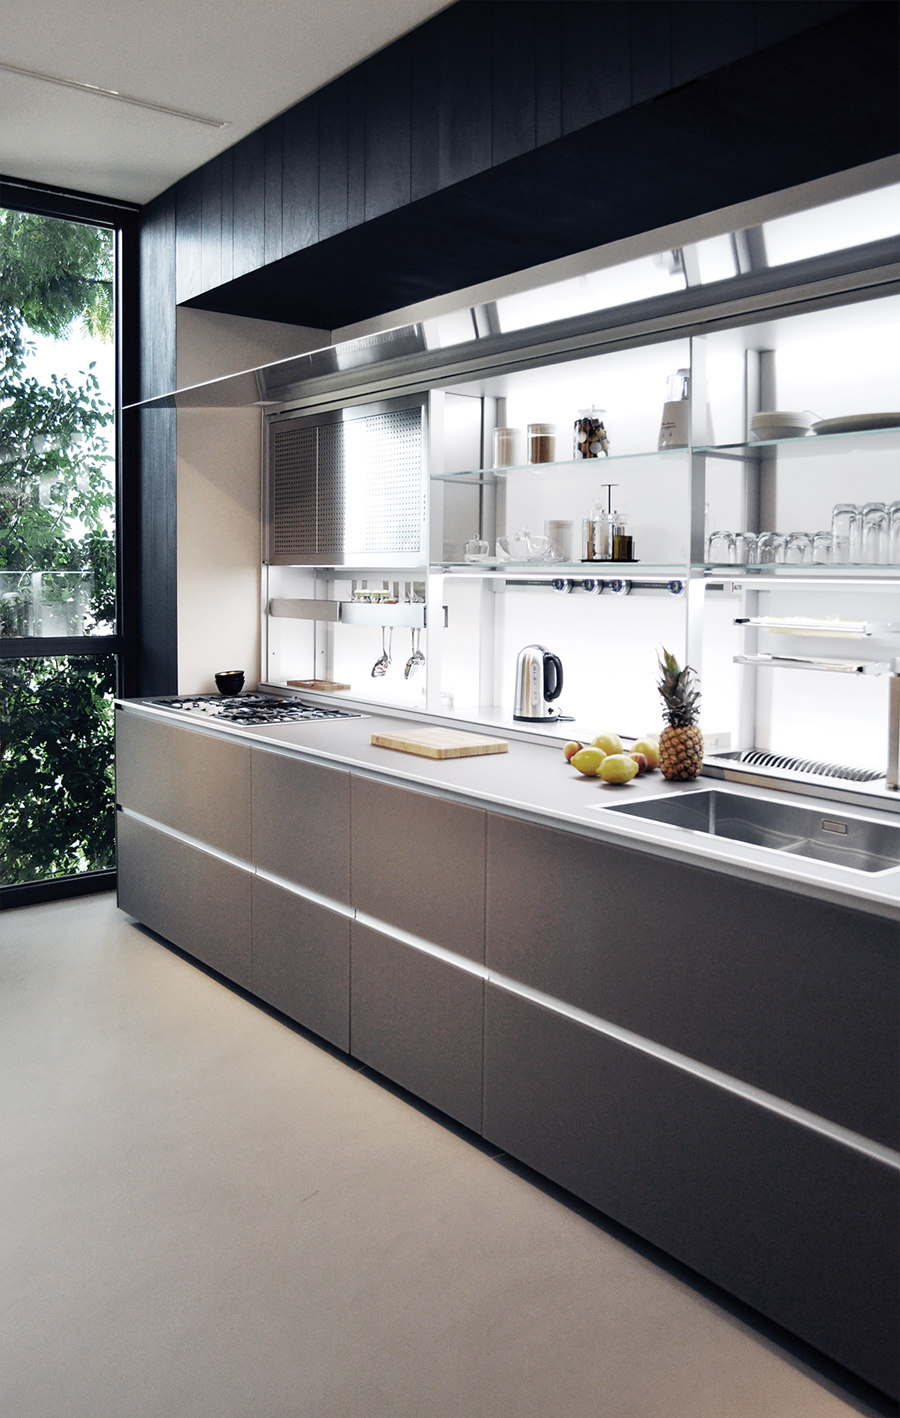 Valcucine in a project by Egidio Panzera at Bosco Verticale by Valcucine | Manufacturer references